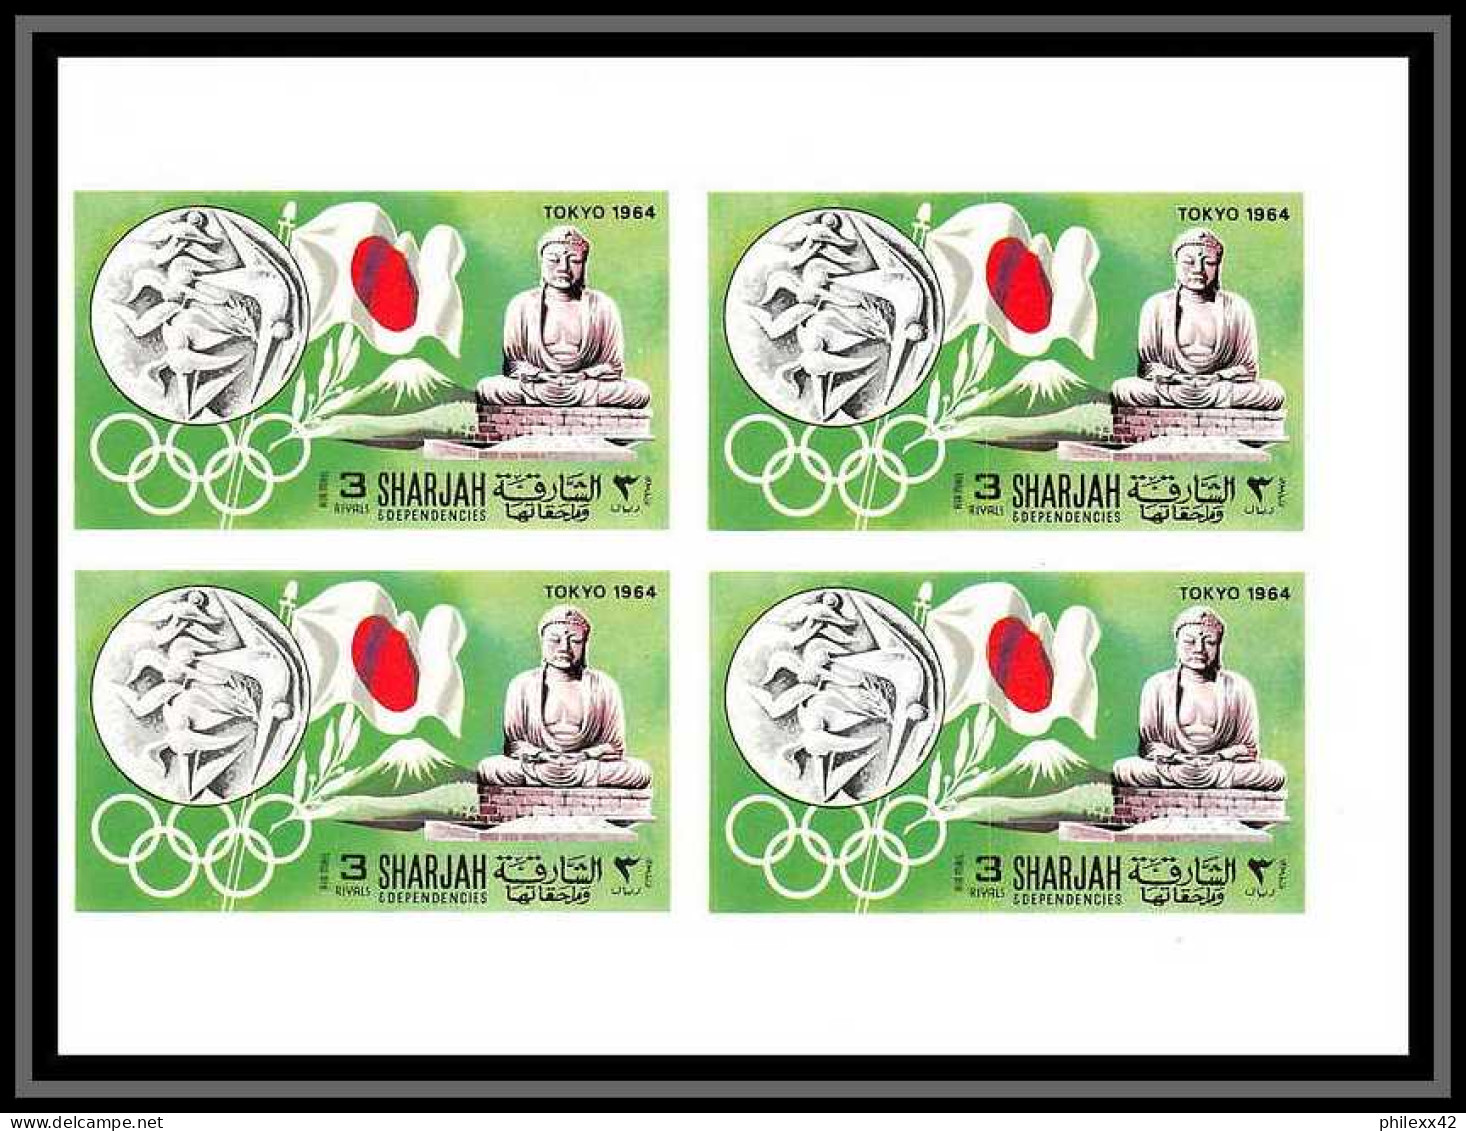 170b Sharjah MNH ** N° 496 / 501 B jeux olympiques (history of the olympic games) mexico bloc 4 non dentelé (Imperf)